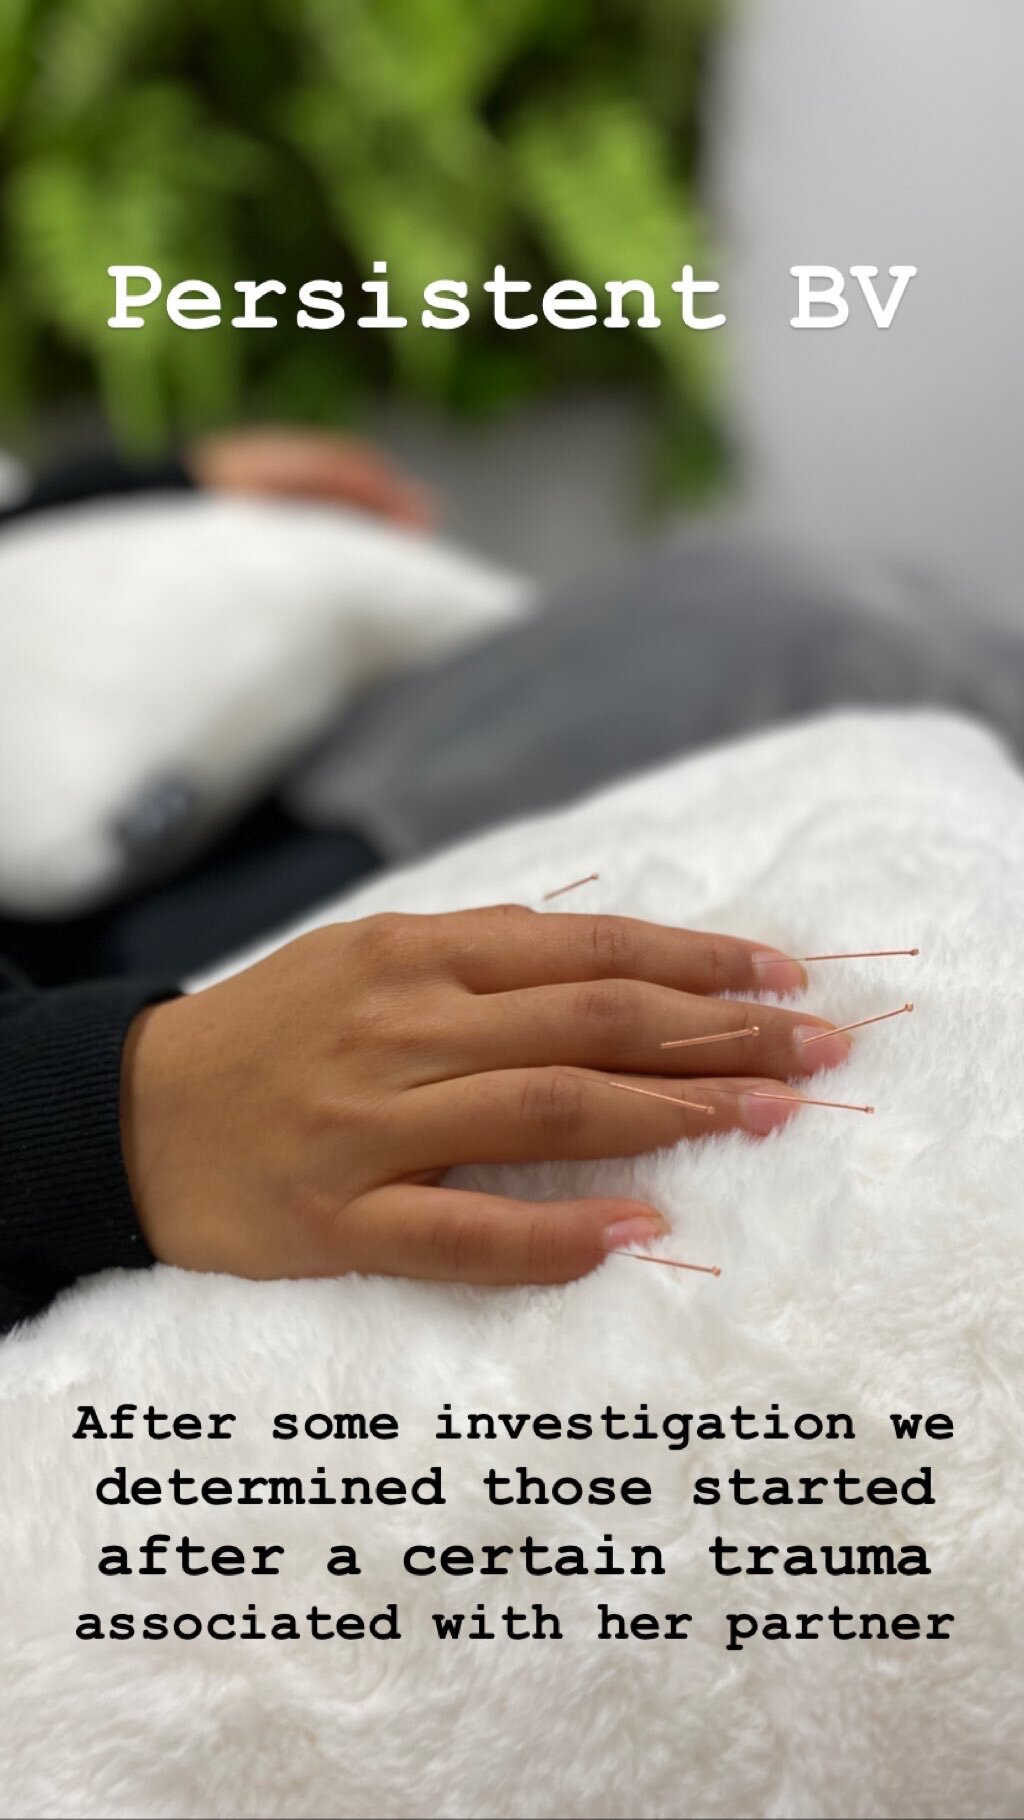  SuJok acupuncture in Vancouver used as alternative treatment for reproductive system issues and conditions. Patient received treatment for persistent Bacterial Vaginosis caused by trauma associated with partner 